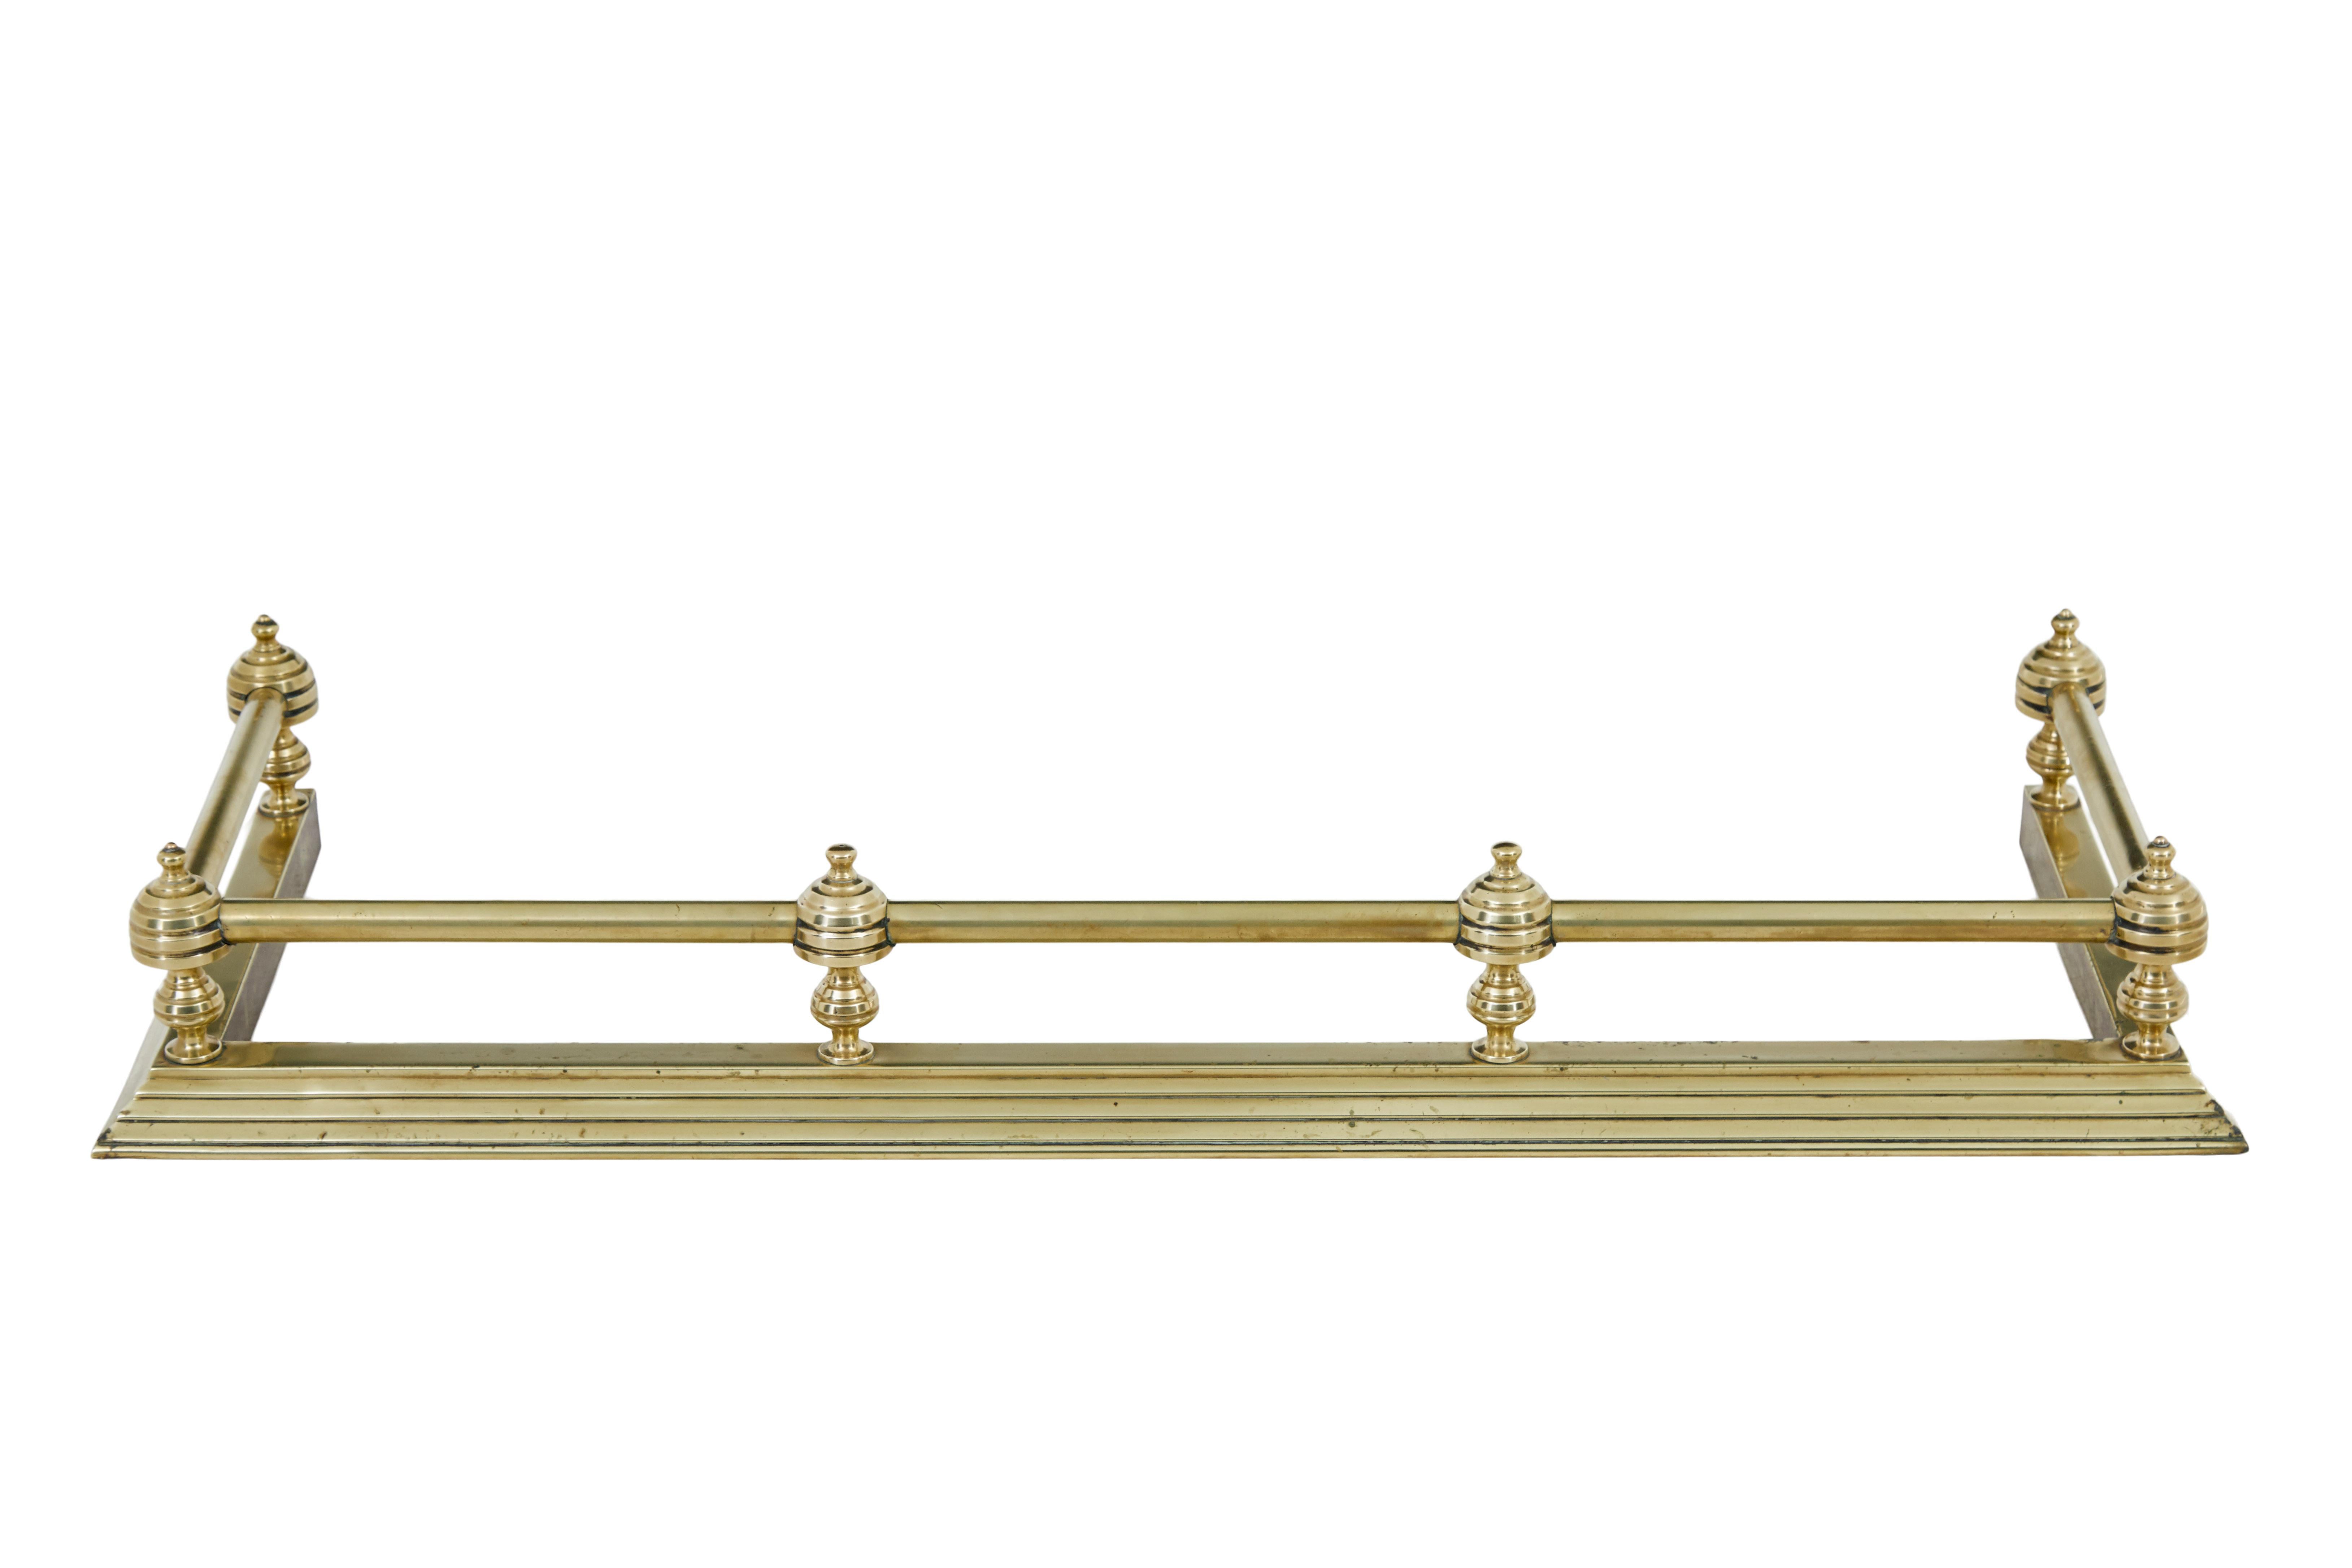 Early 20th century brass fireside fender circa 1900.

Elegant and simple brass fender.  6 turned finials linked by tubing which form an open rectangular shape.  Standing on a stepped plinth base.

Inside measurement: 42